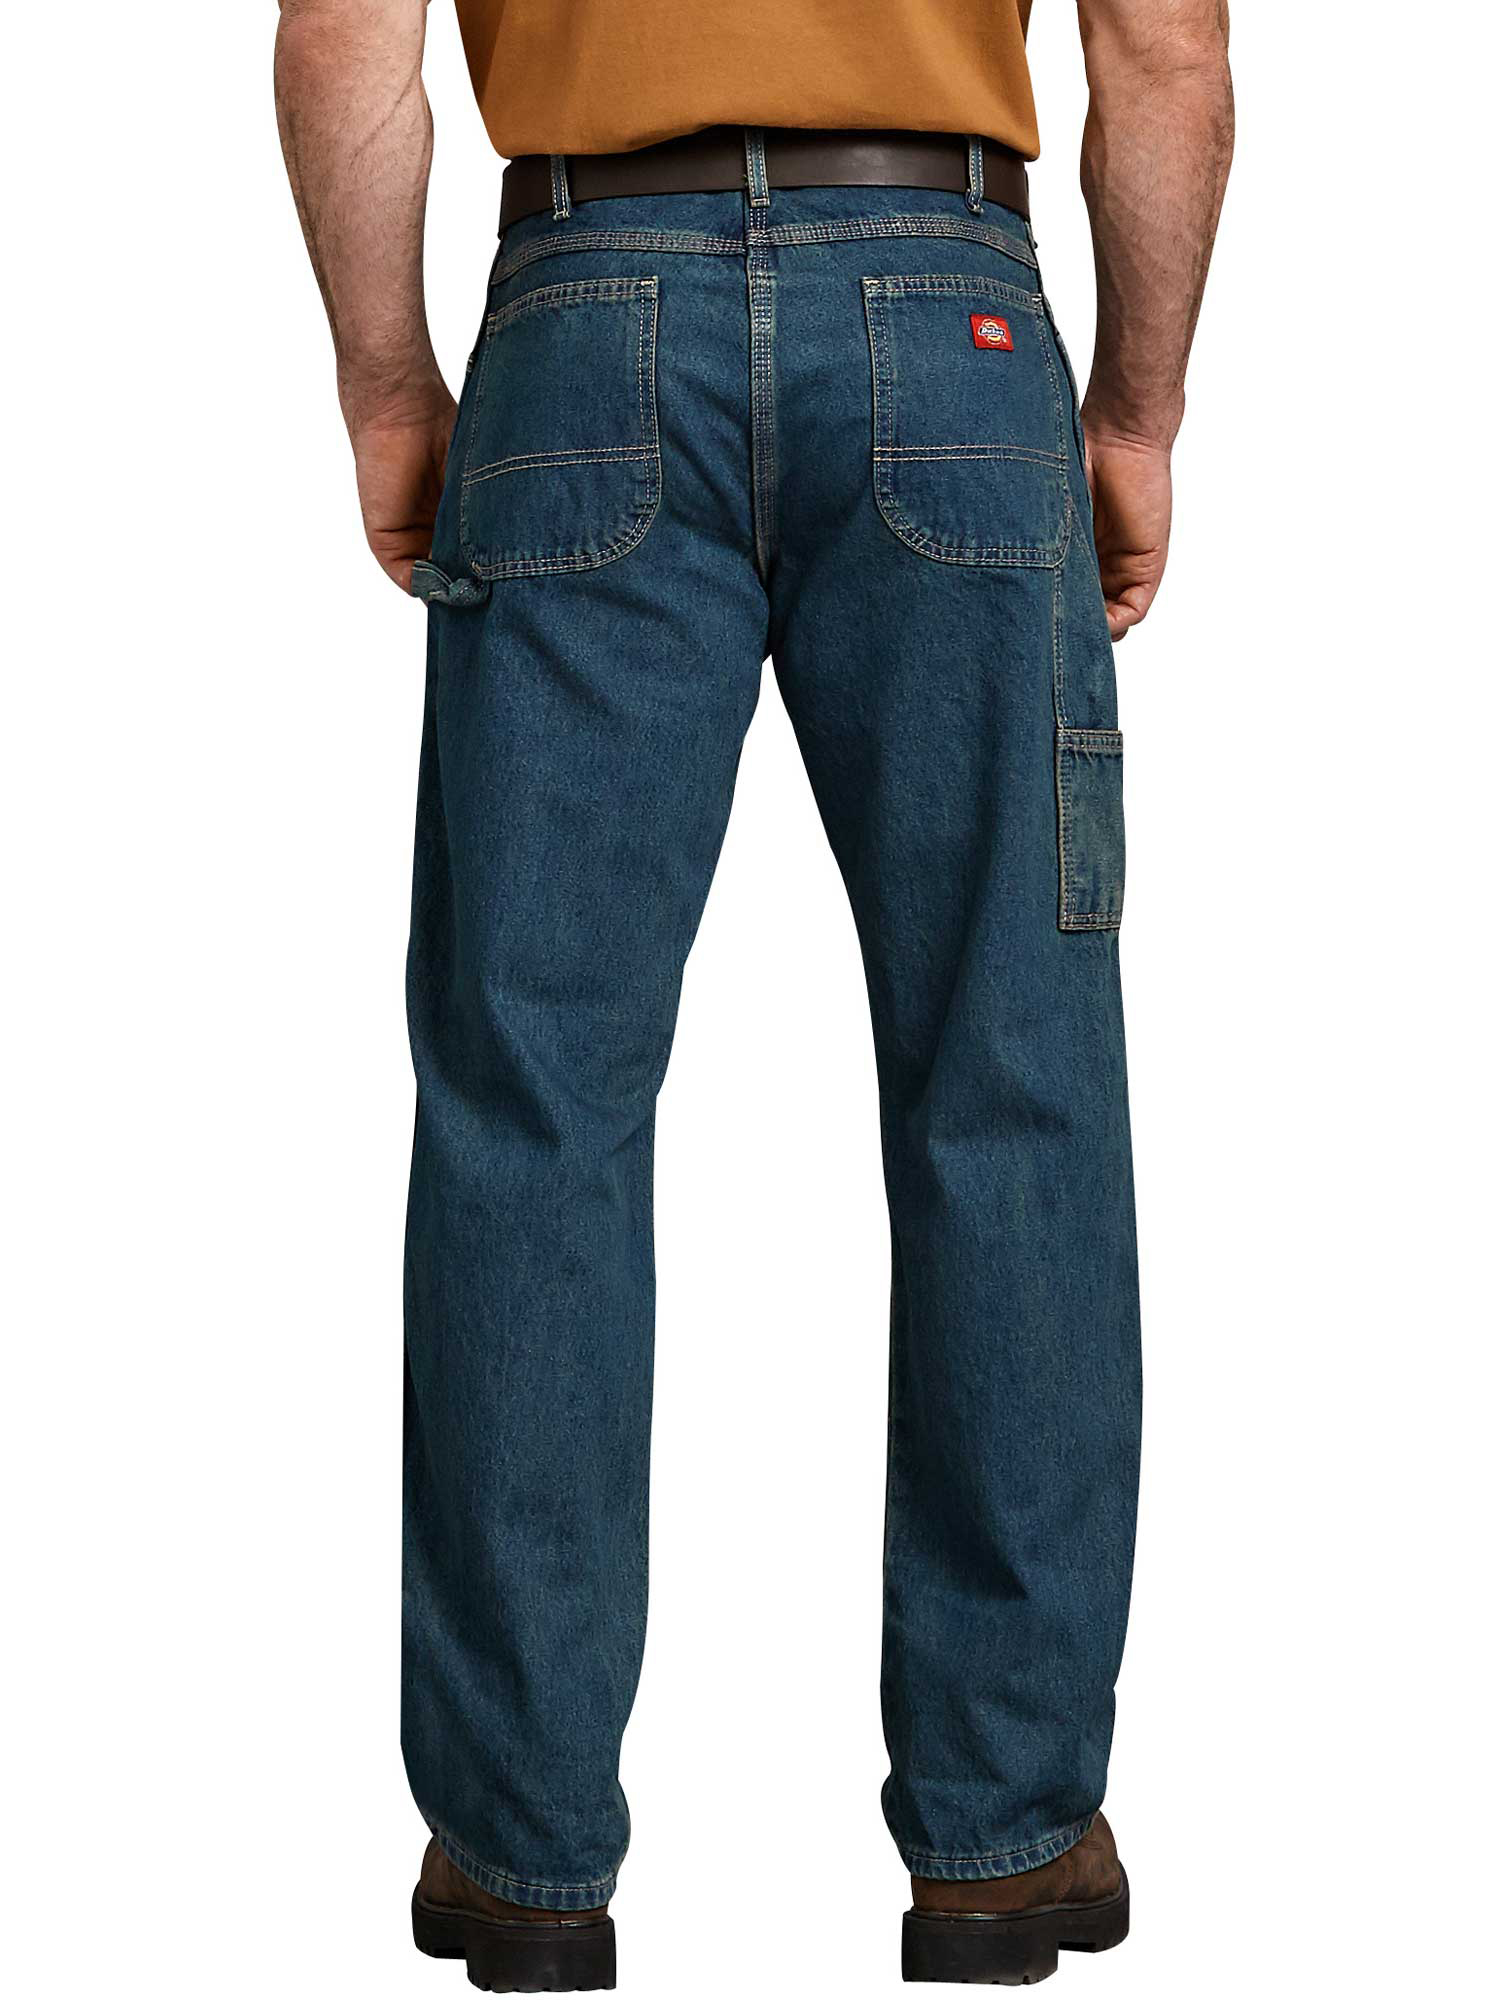 Dickies Mens and Big Mens Relaxed Fit Stonewashed Carpenter Denim Jeans - image 3 of 3